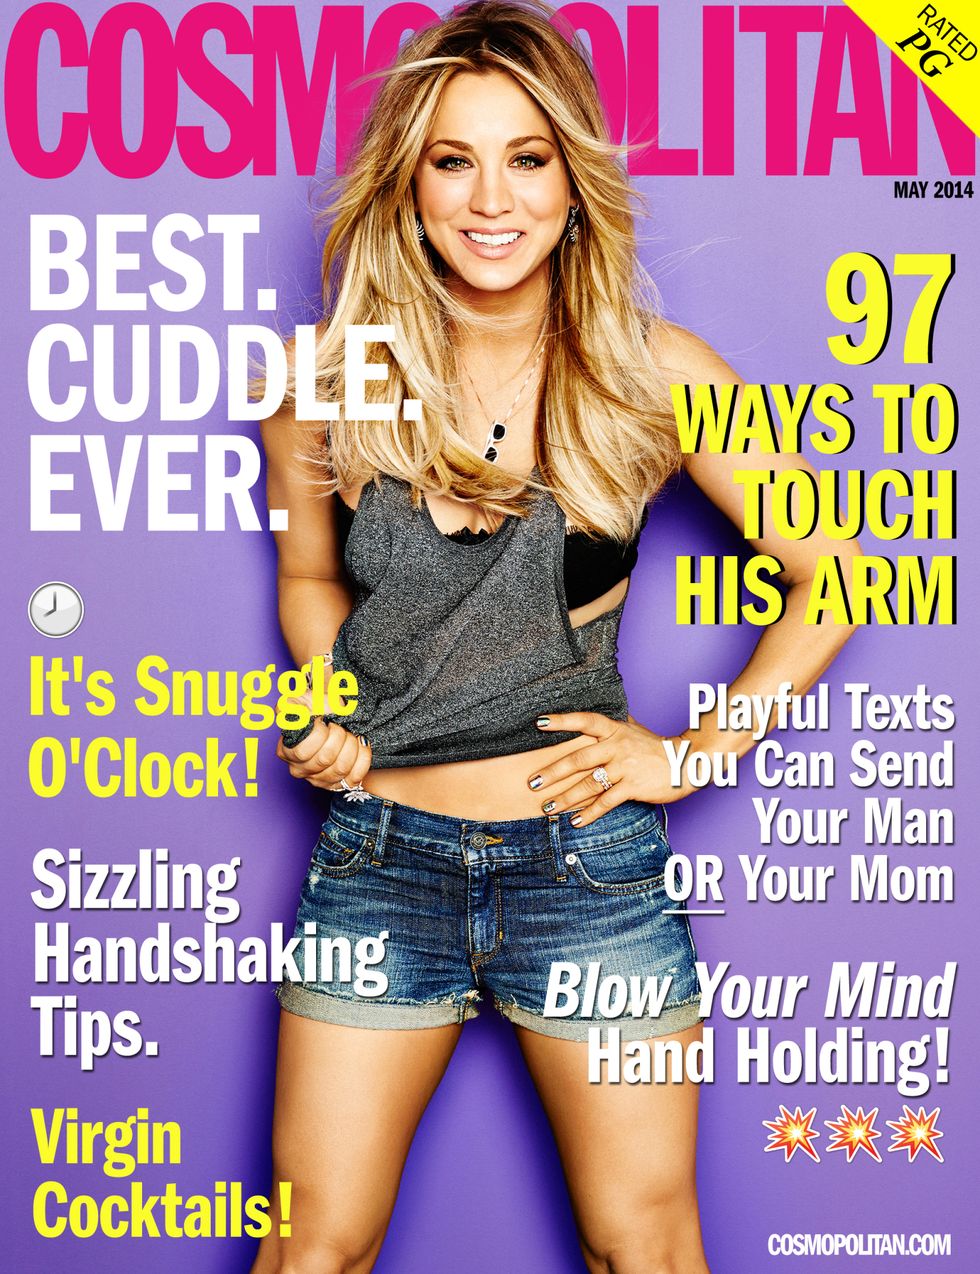 See 3 G Rated Cosmo Covers